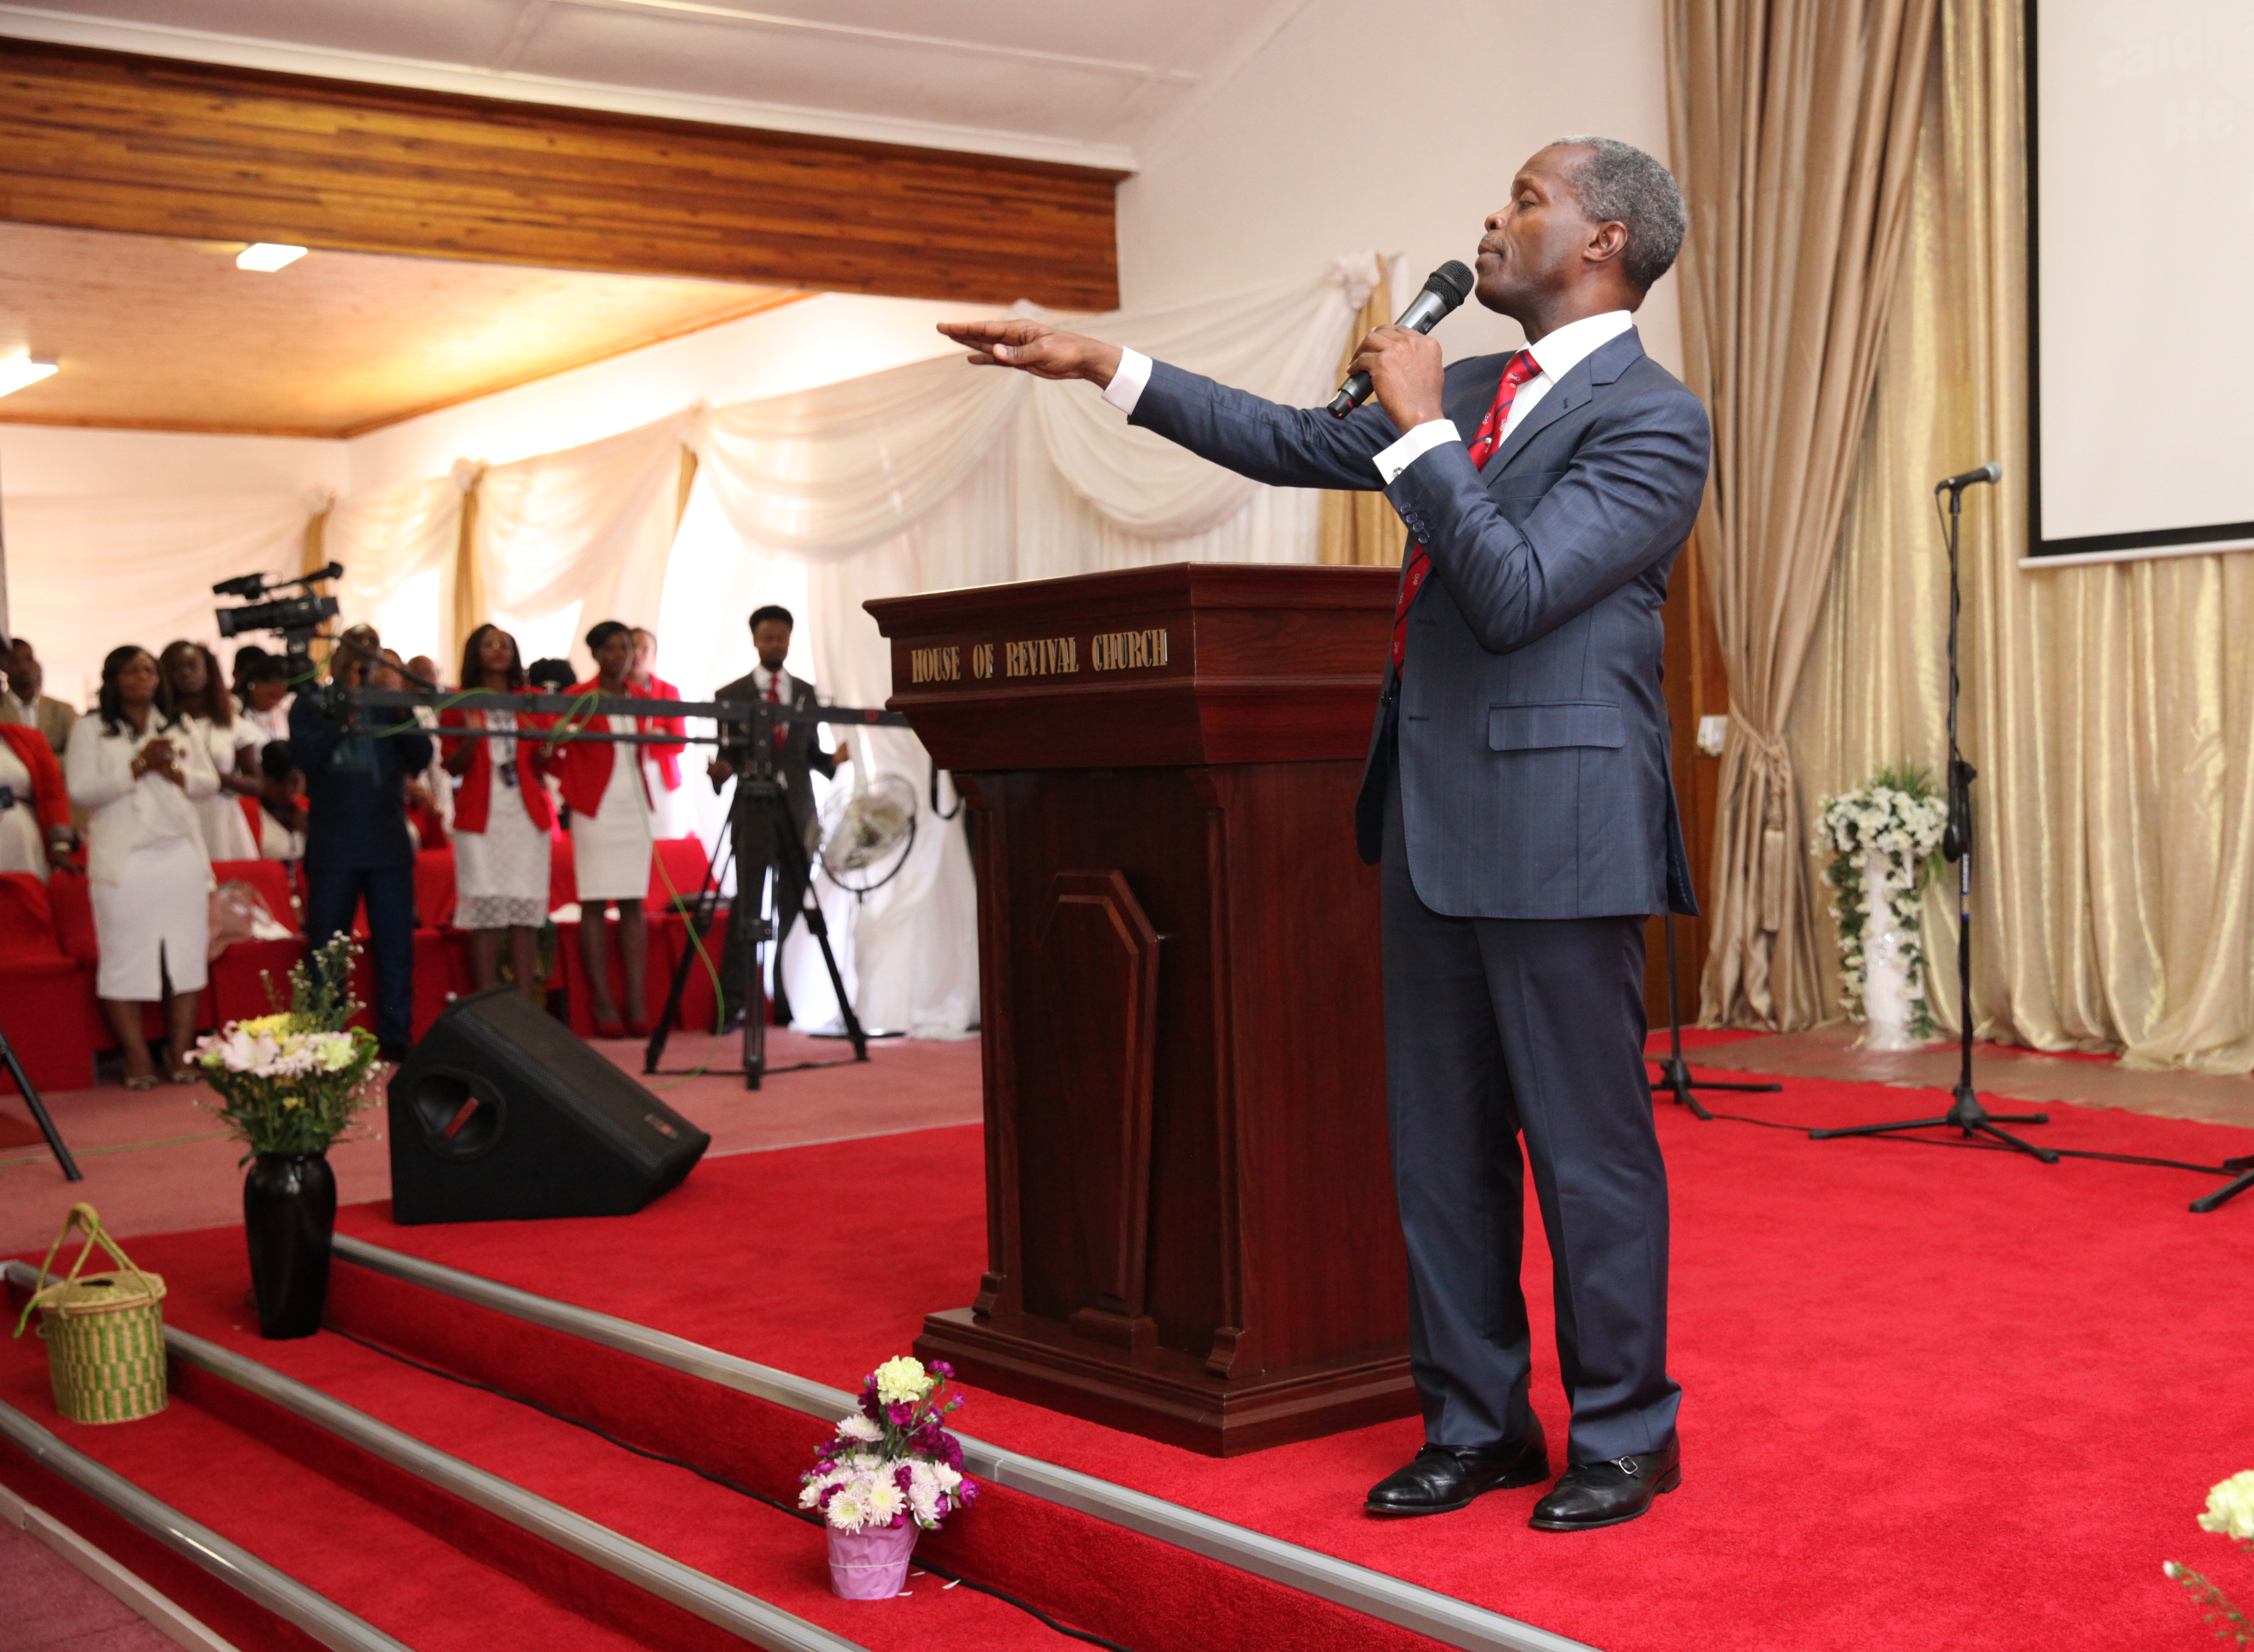 VP Osinbajo Ministering At The House Of Revival Church Brakpan, South Africa On 11/10/2015